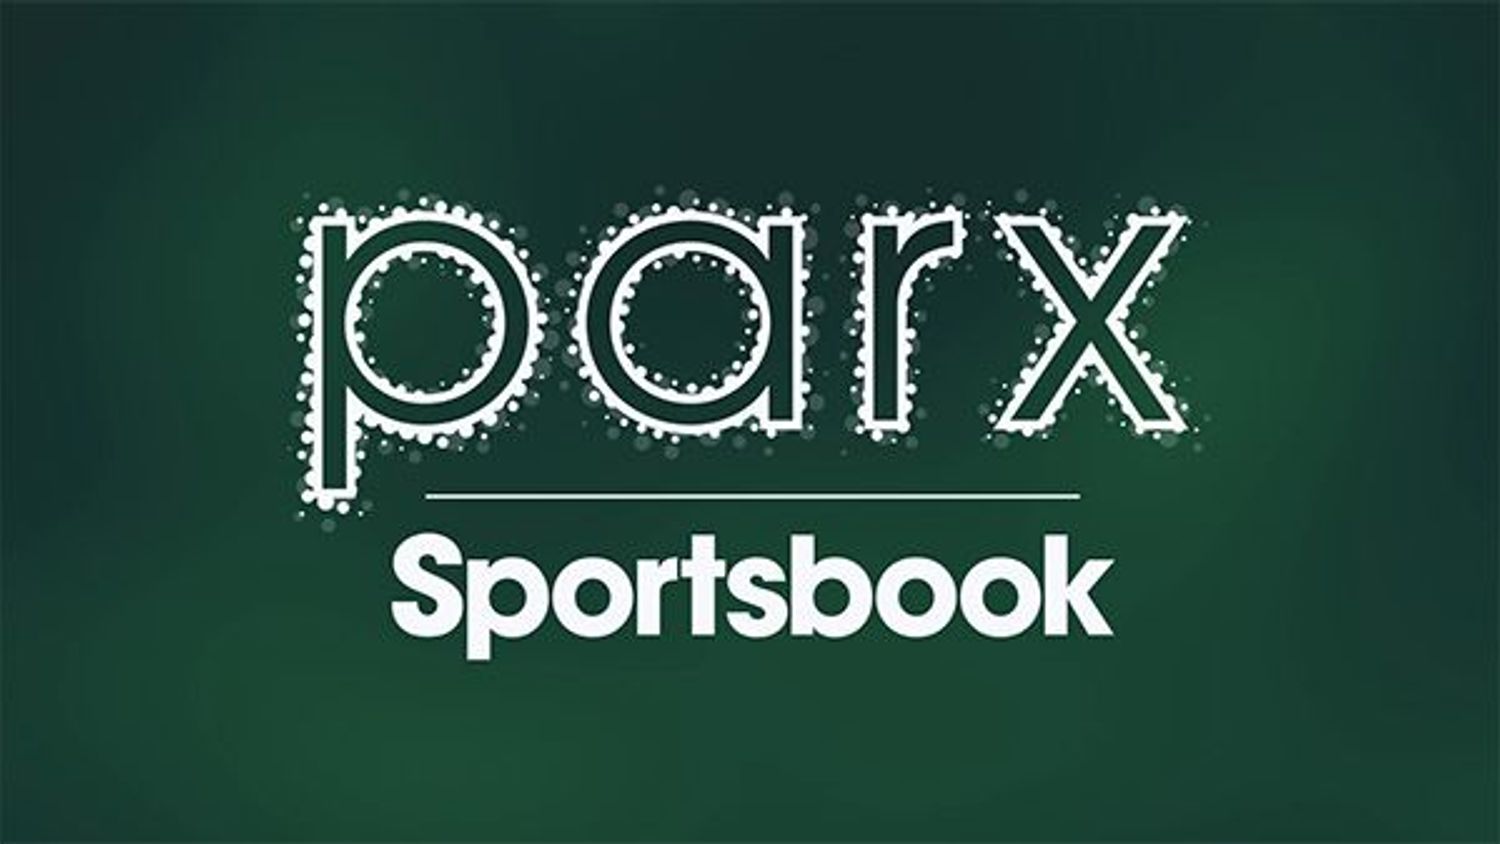 parx casino and sportsbook